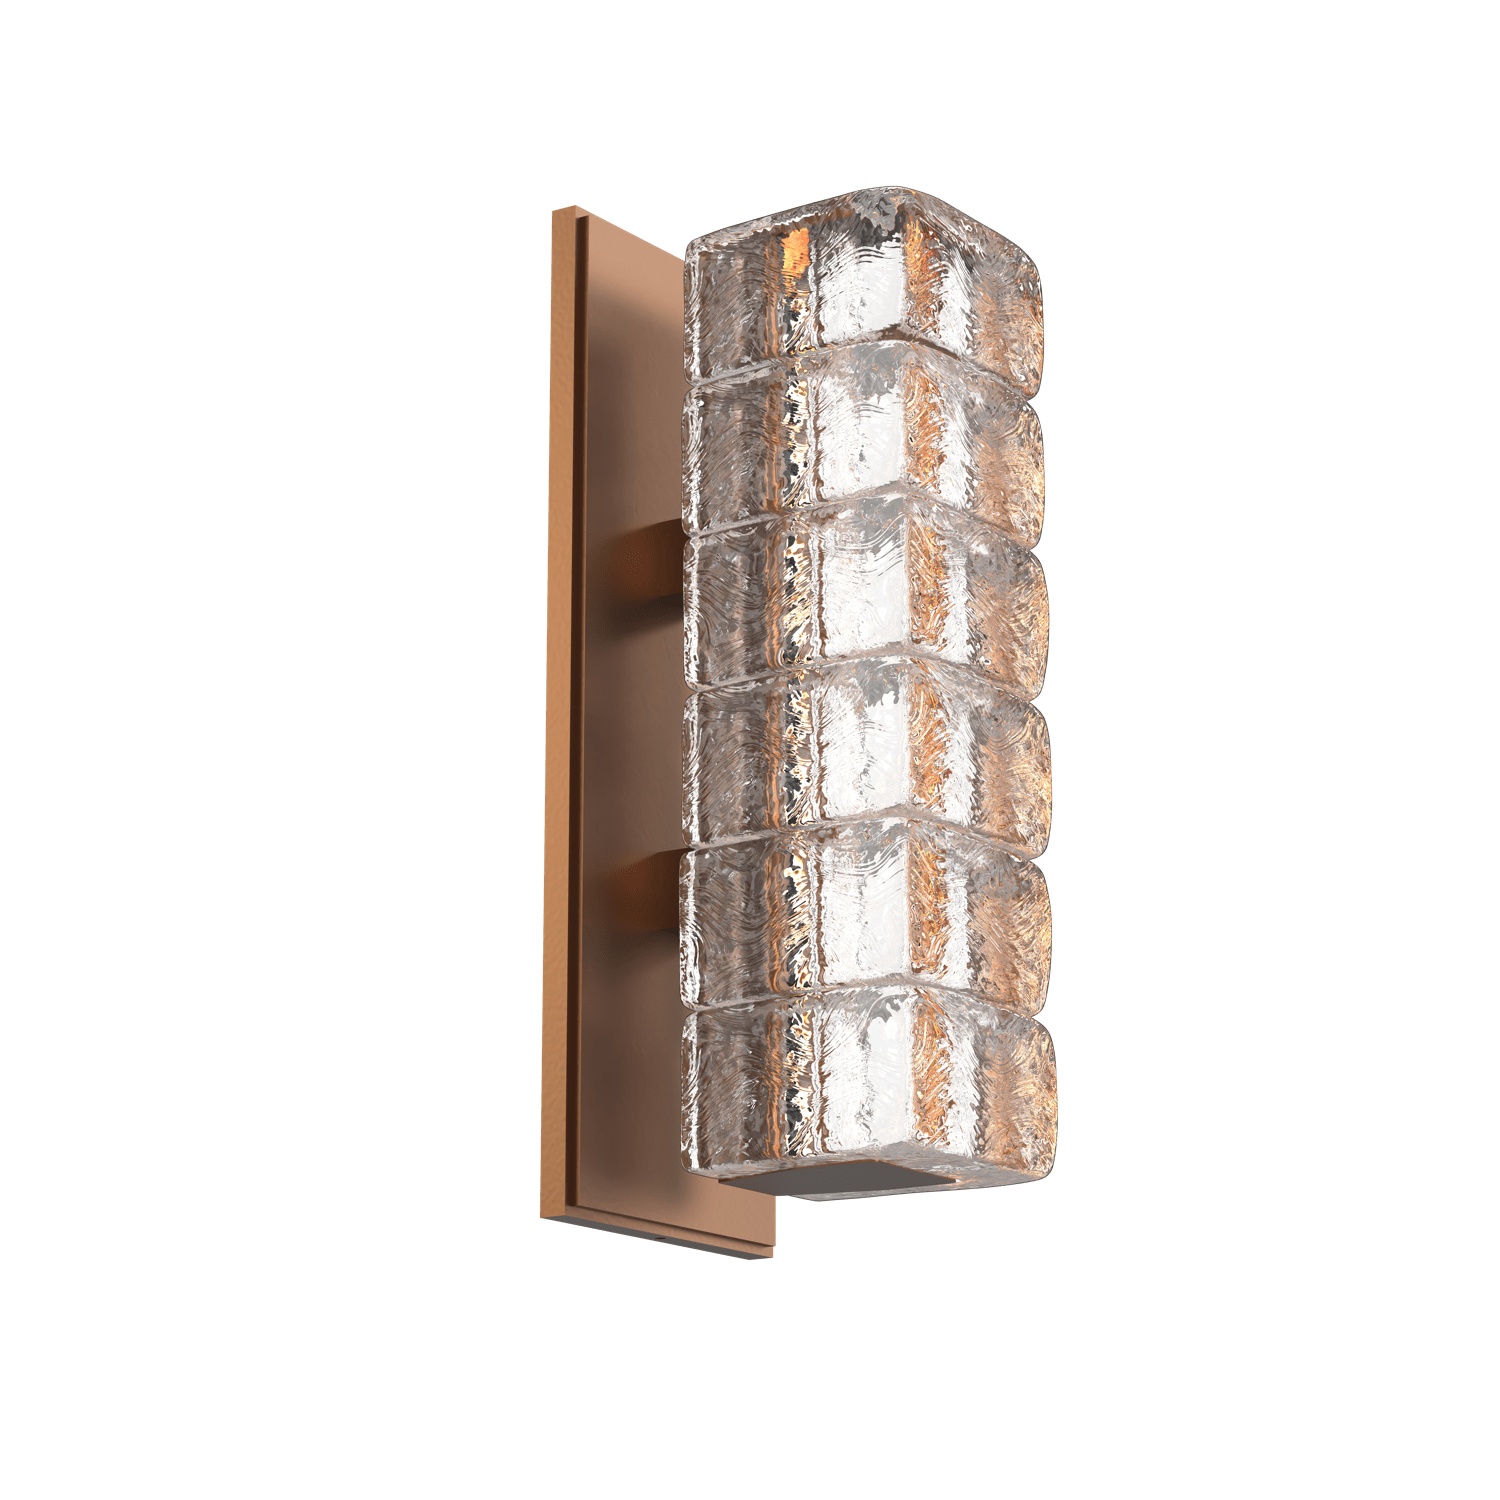 IDB0080-01-BB-Hammerton-Studio-Asscher-wall-sconce-with-burnished-bronze-finish-and-clear-cast-glass-shades-and-LED-lamping